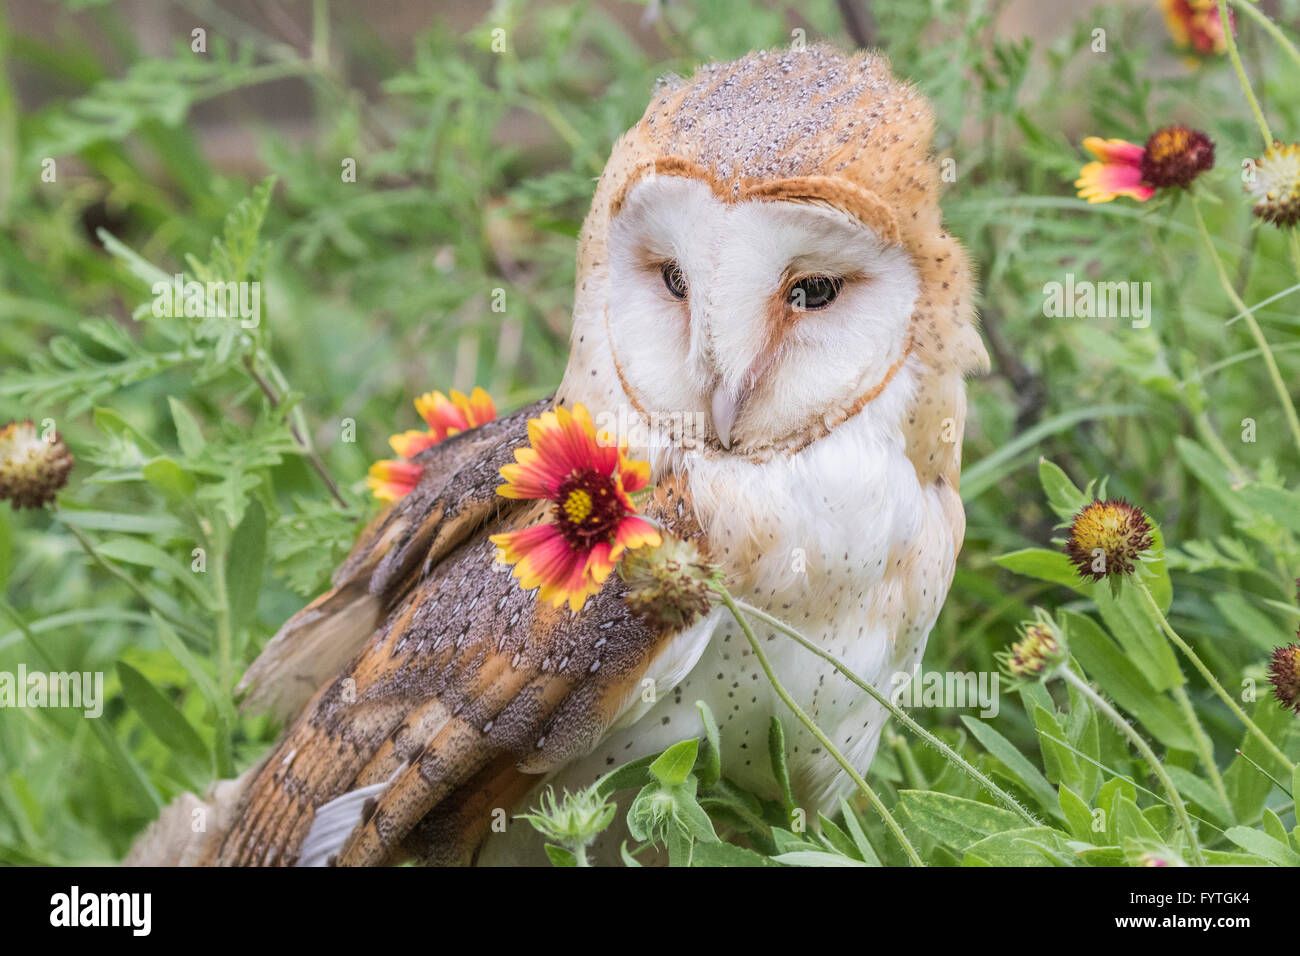 European Barn Owl, a Rescue bird, rehabilitated and trained for education and conversation purposes. In field of Gaillardia. Stock Photo